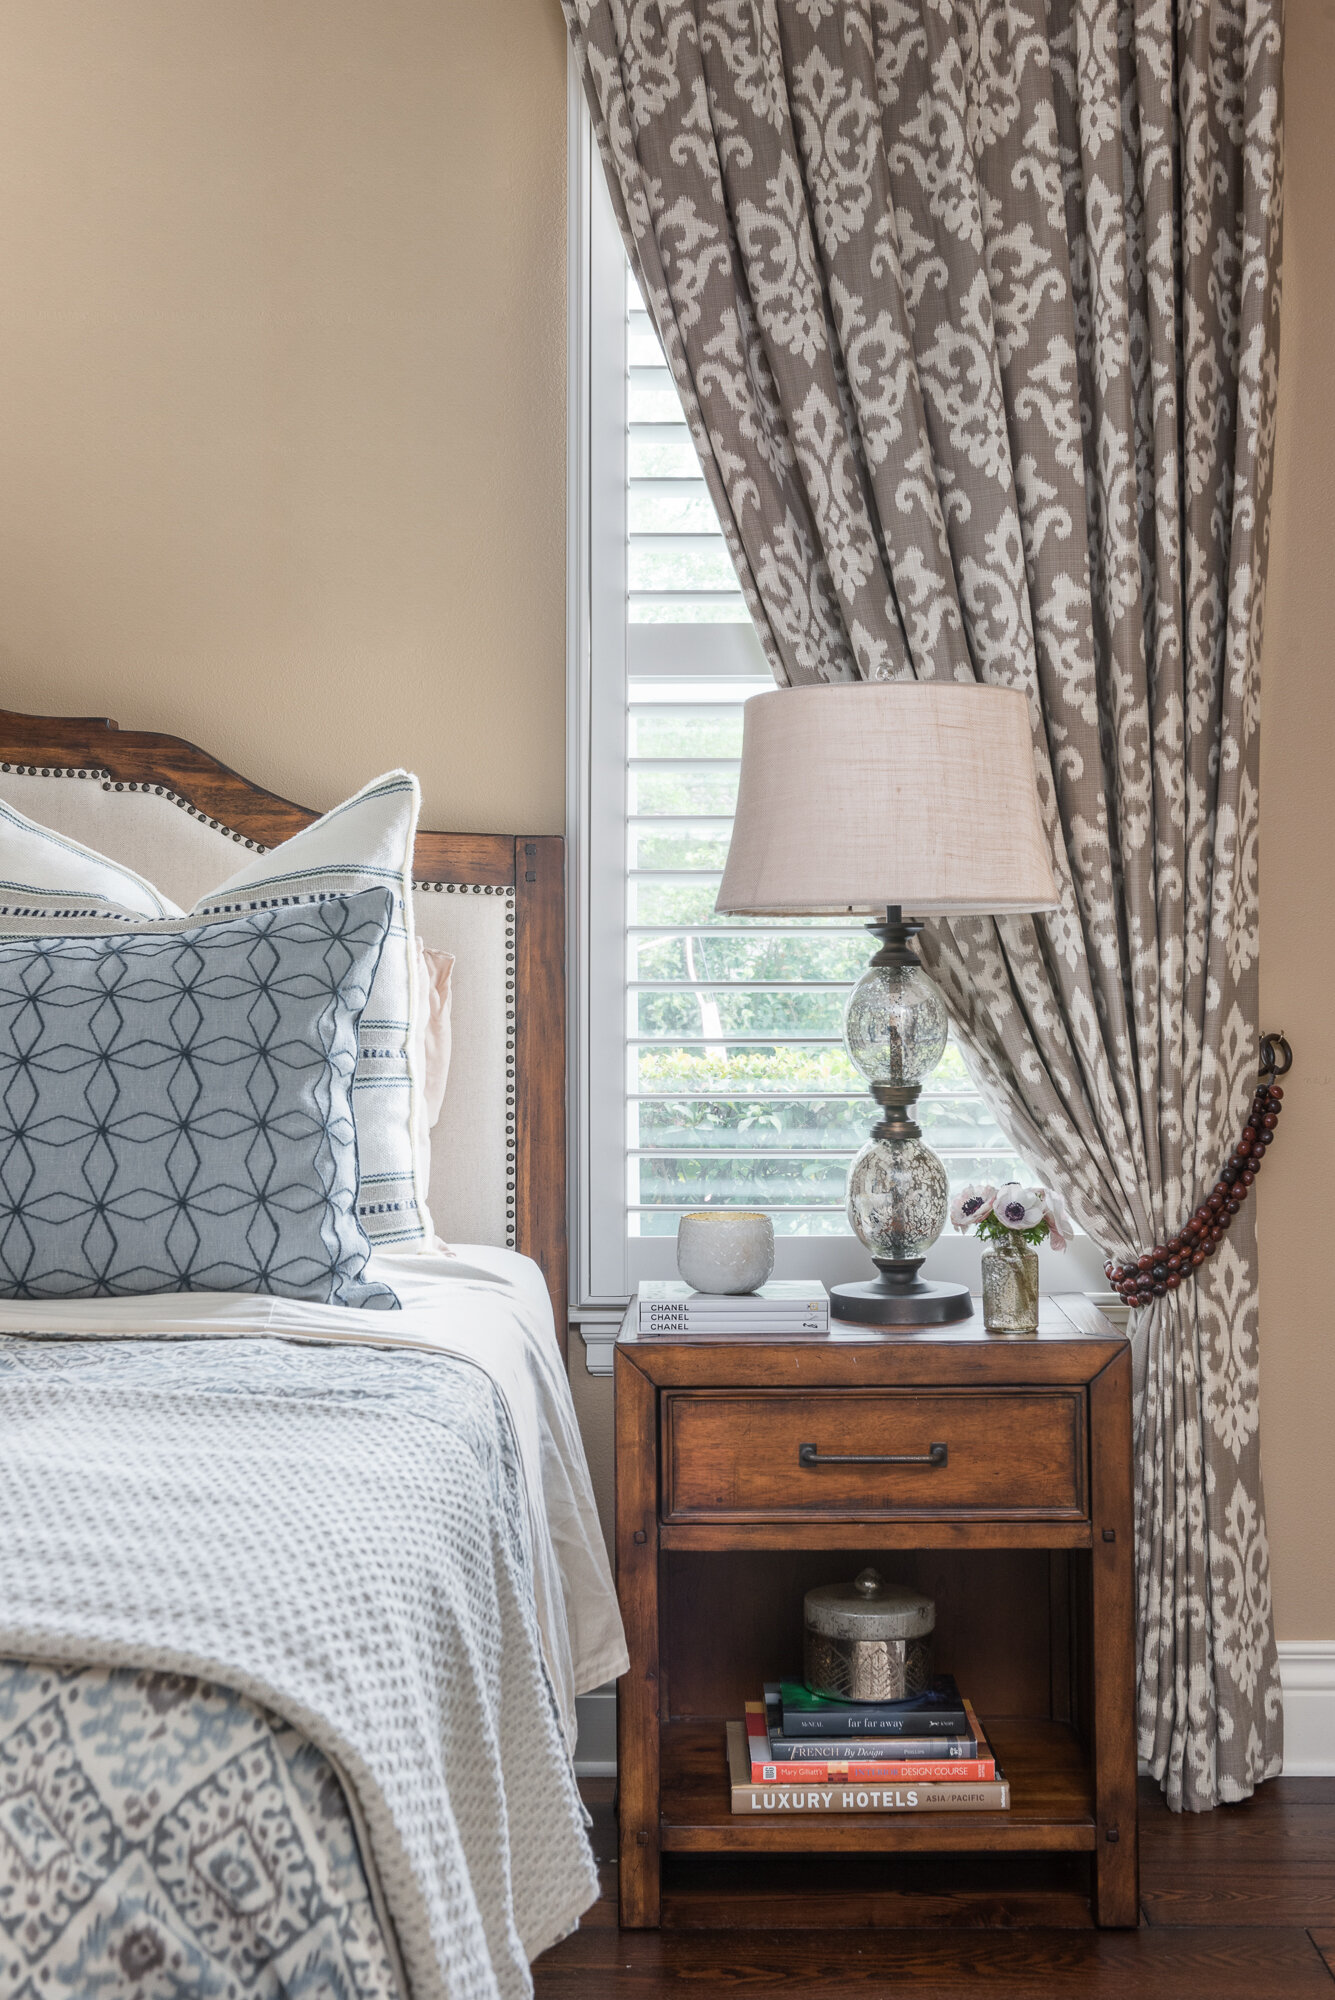 Wood, blue, and cream bedroom with blue printed window treatment curtains